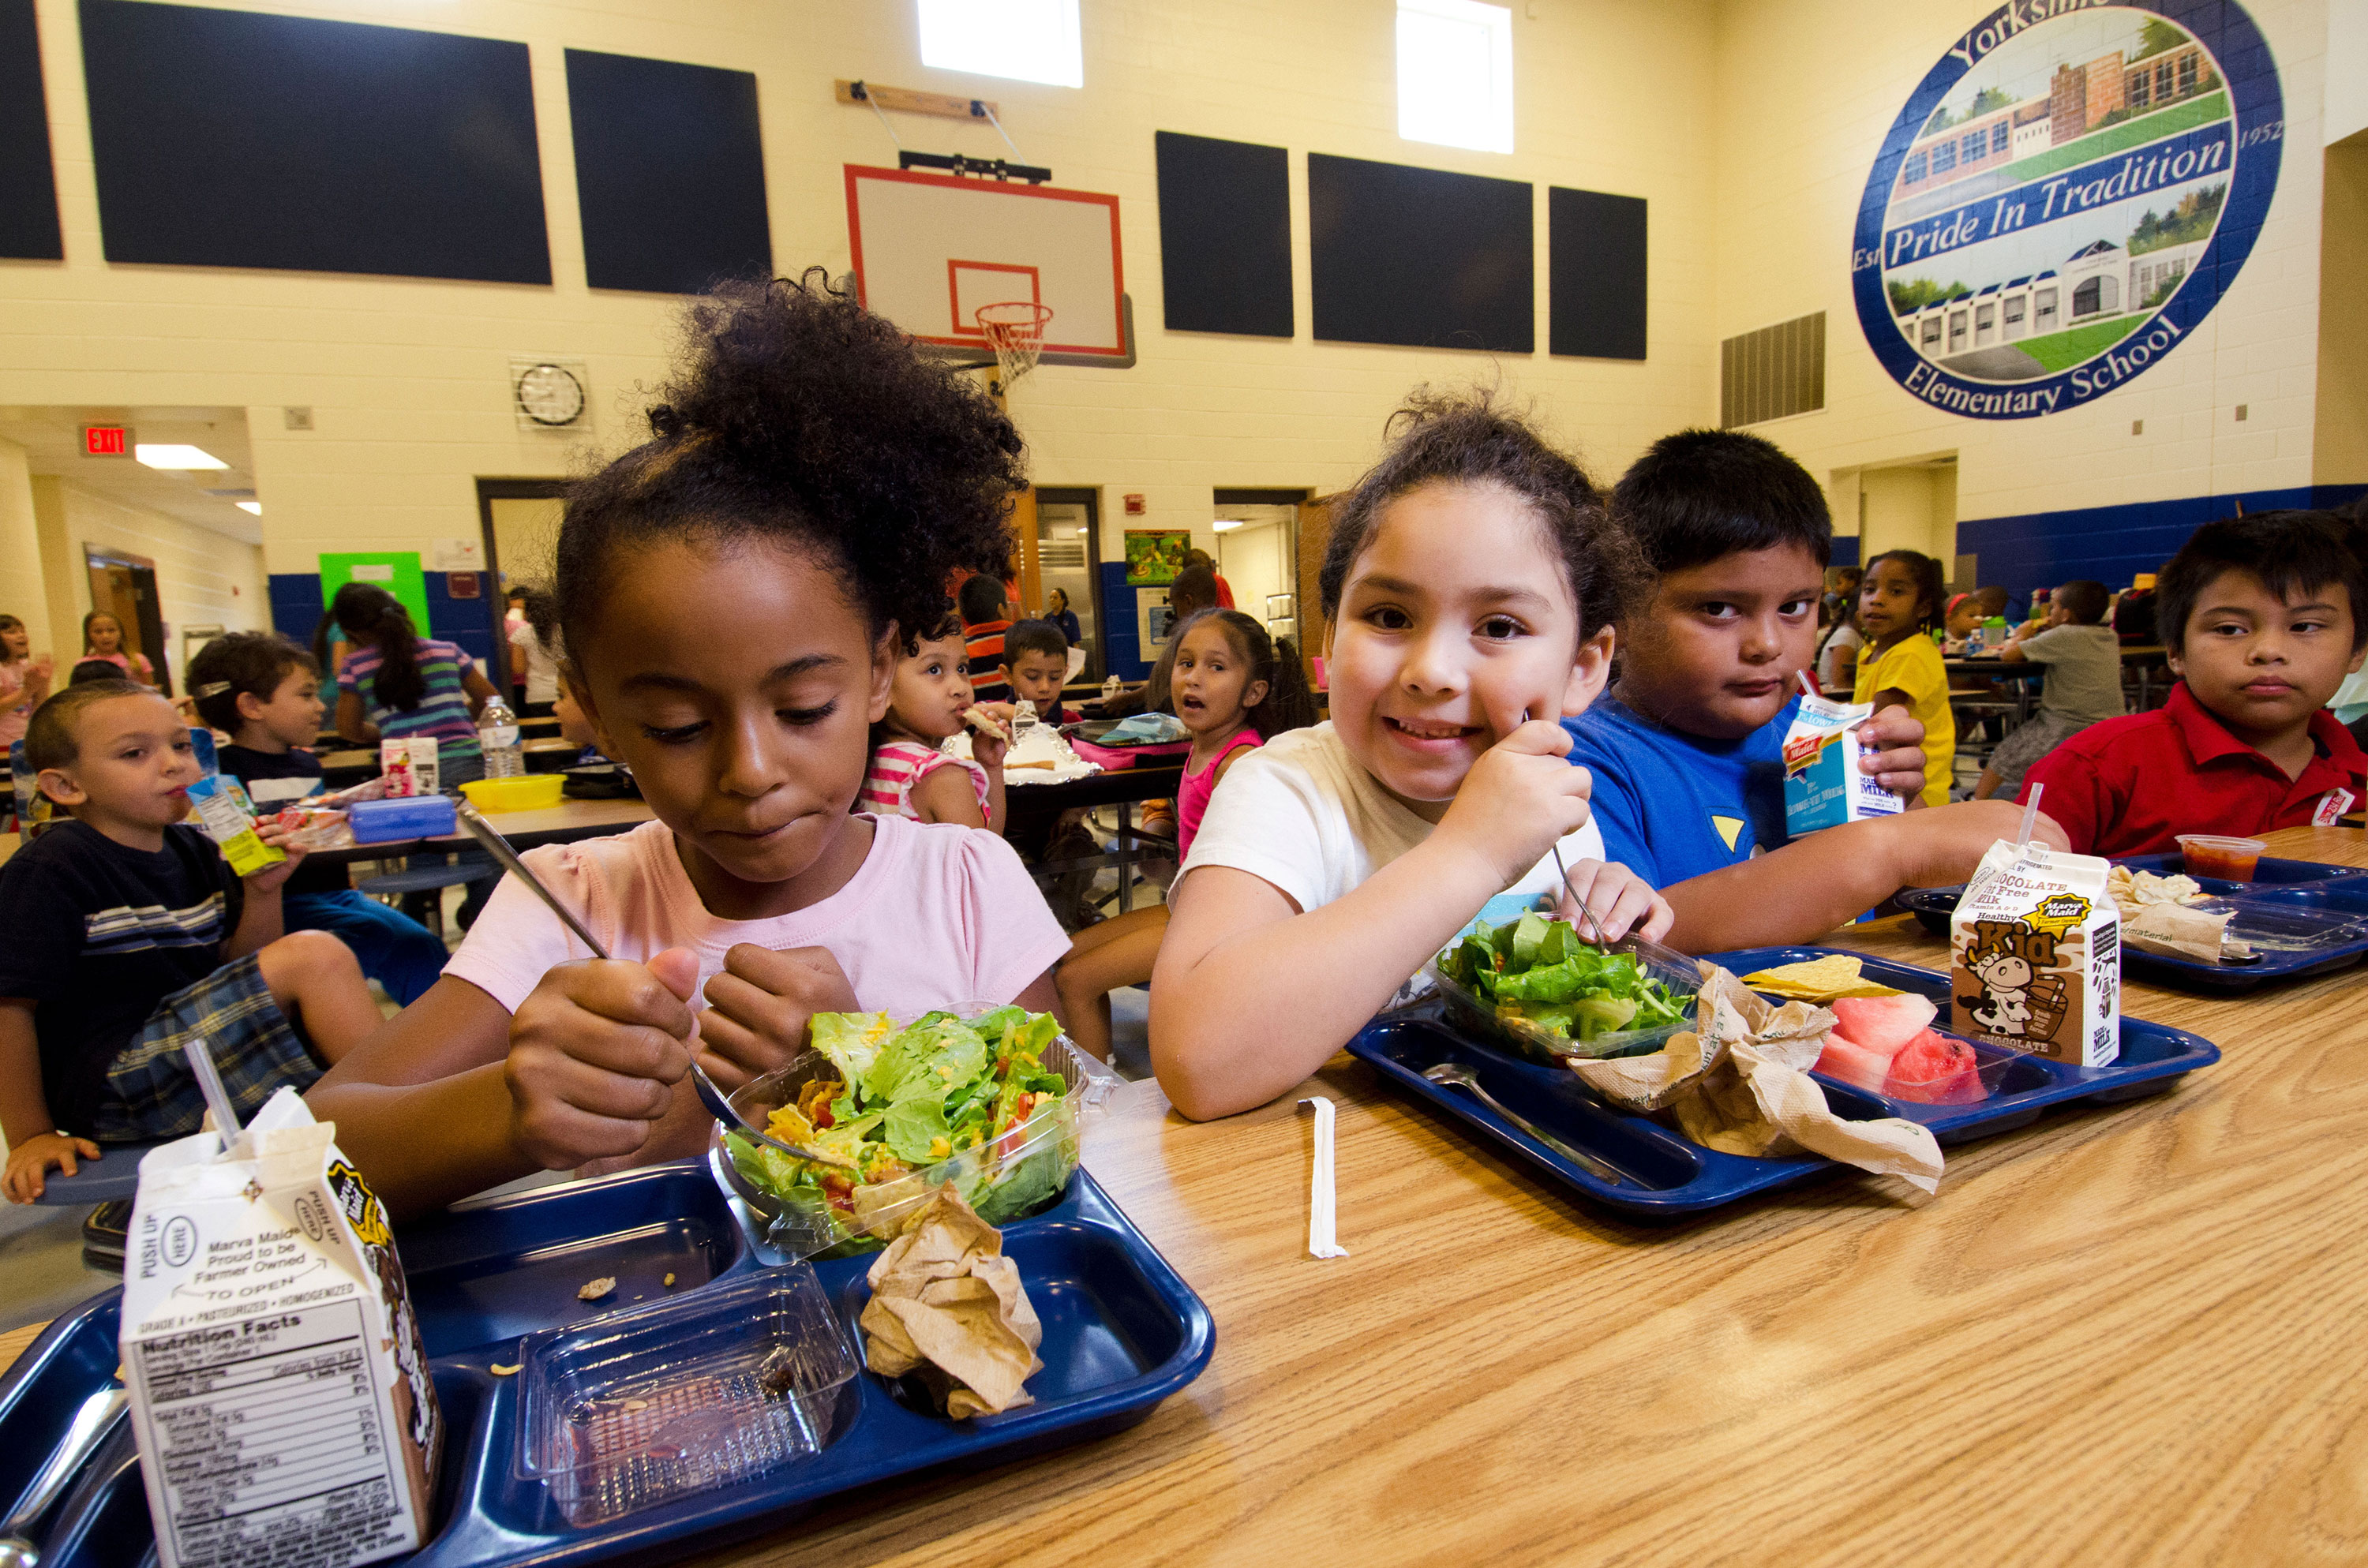 A group of elementary school children sitting at a school lunch table.